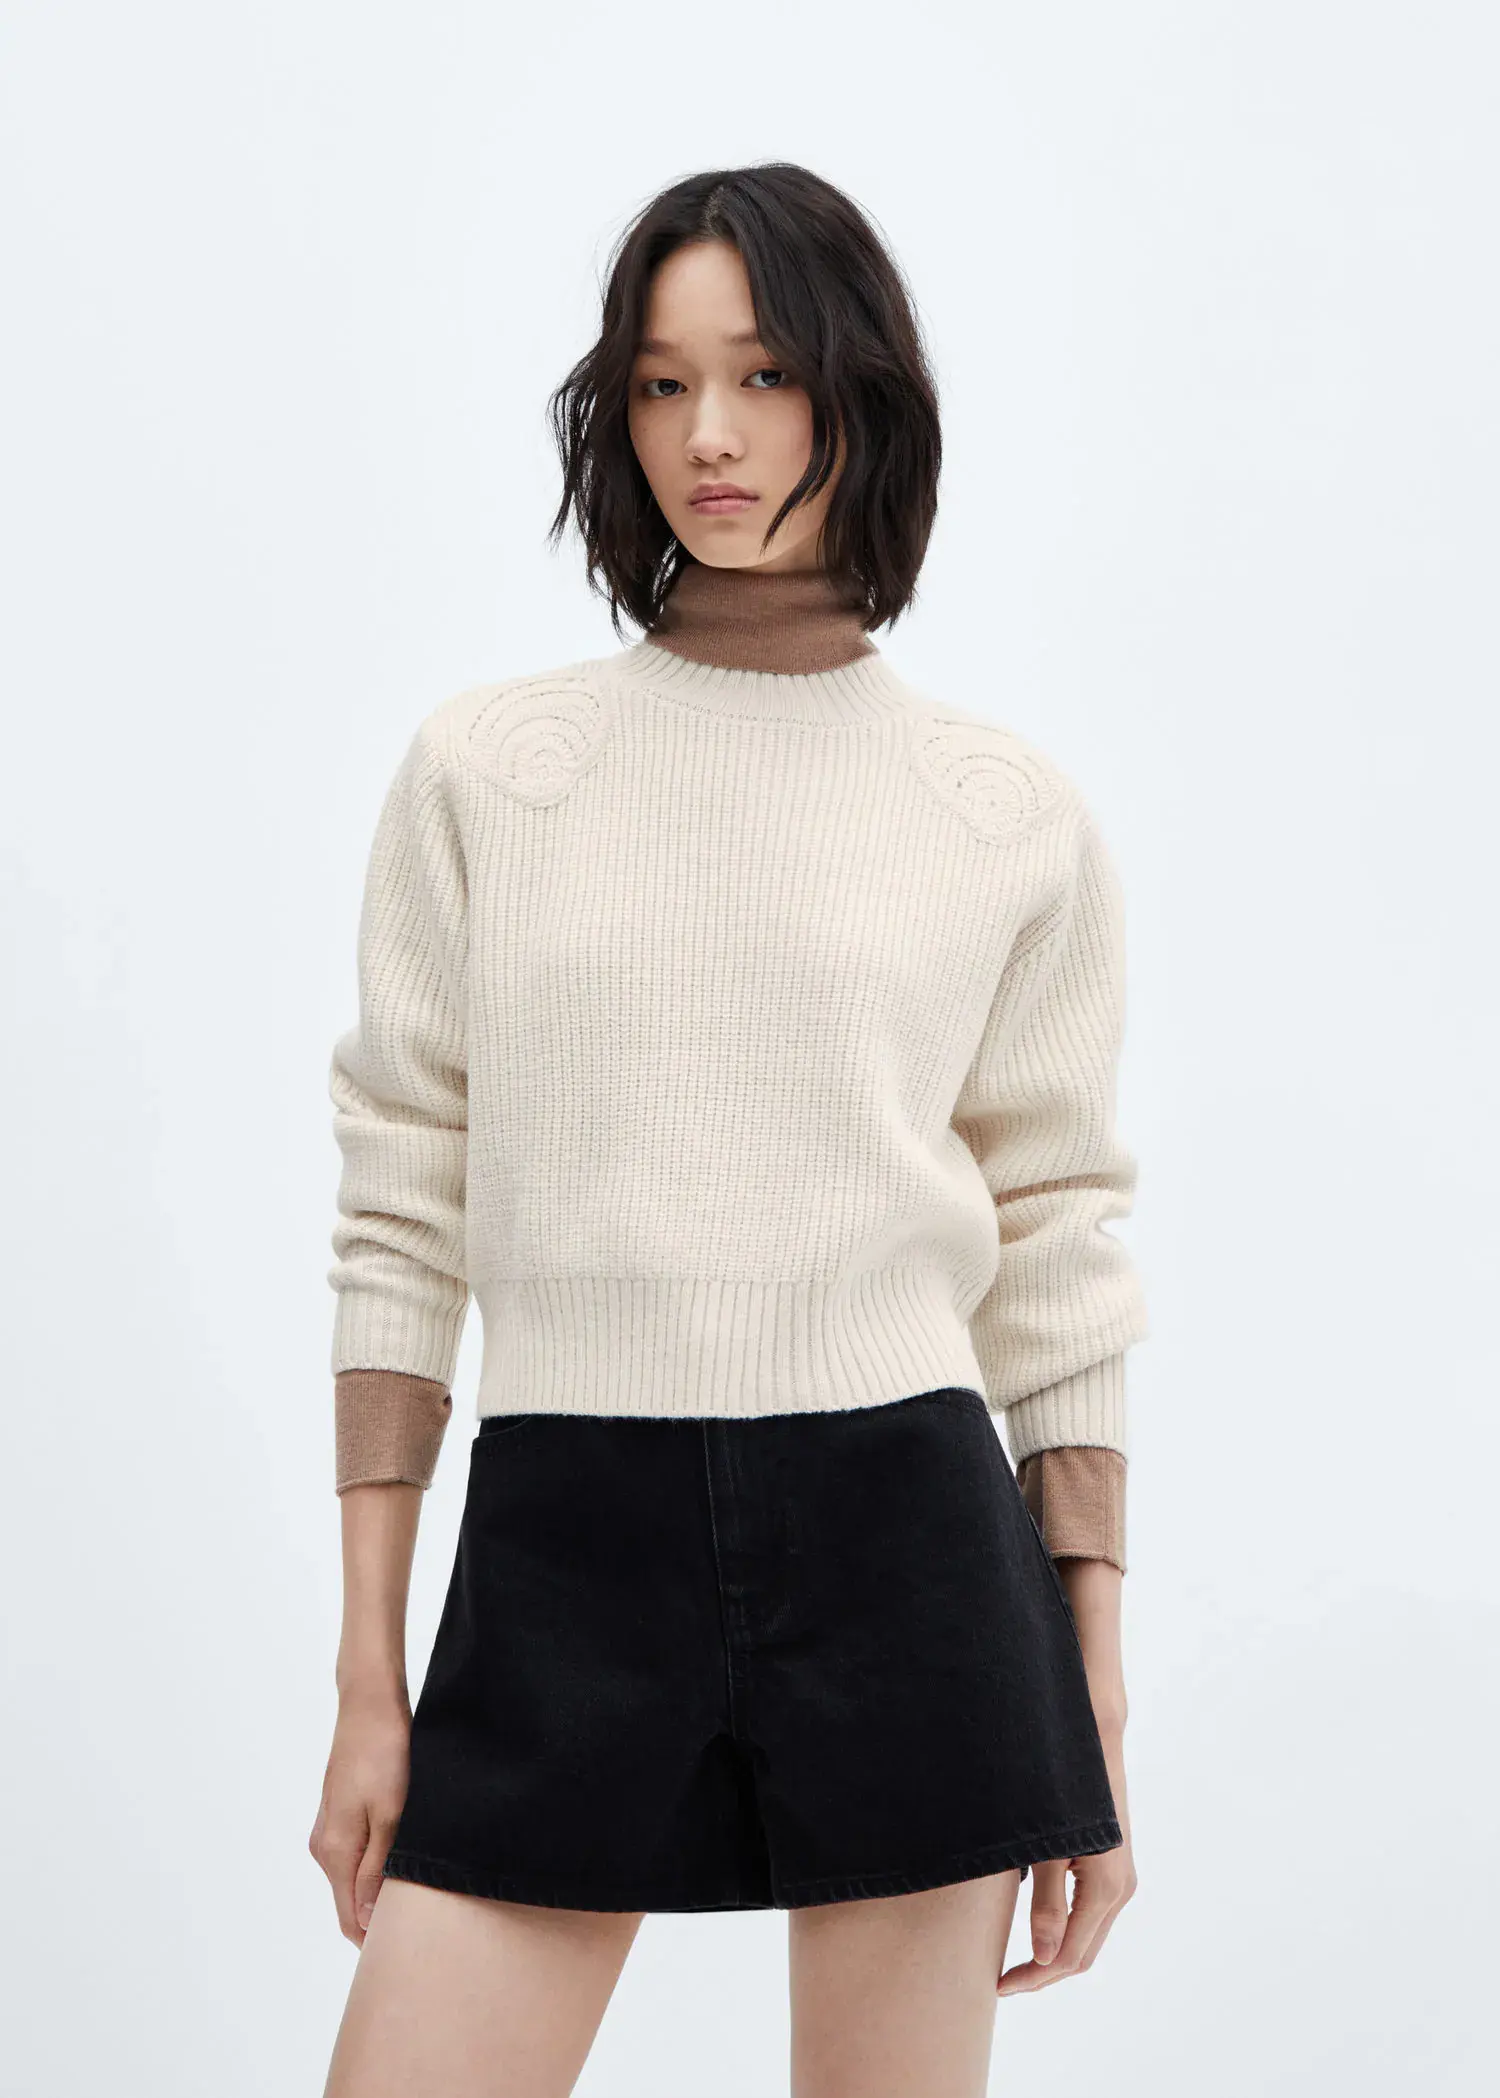 Mango Perkins neck sweater with shoulder detail. 1